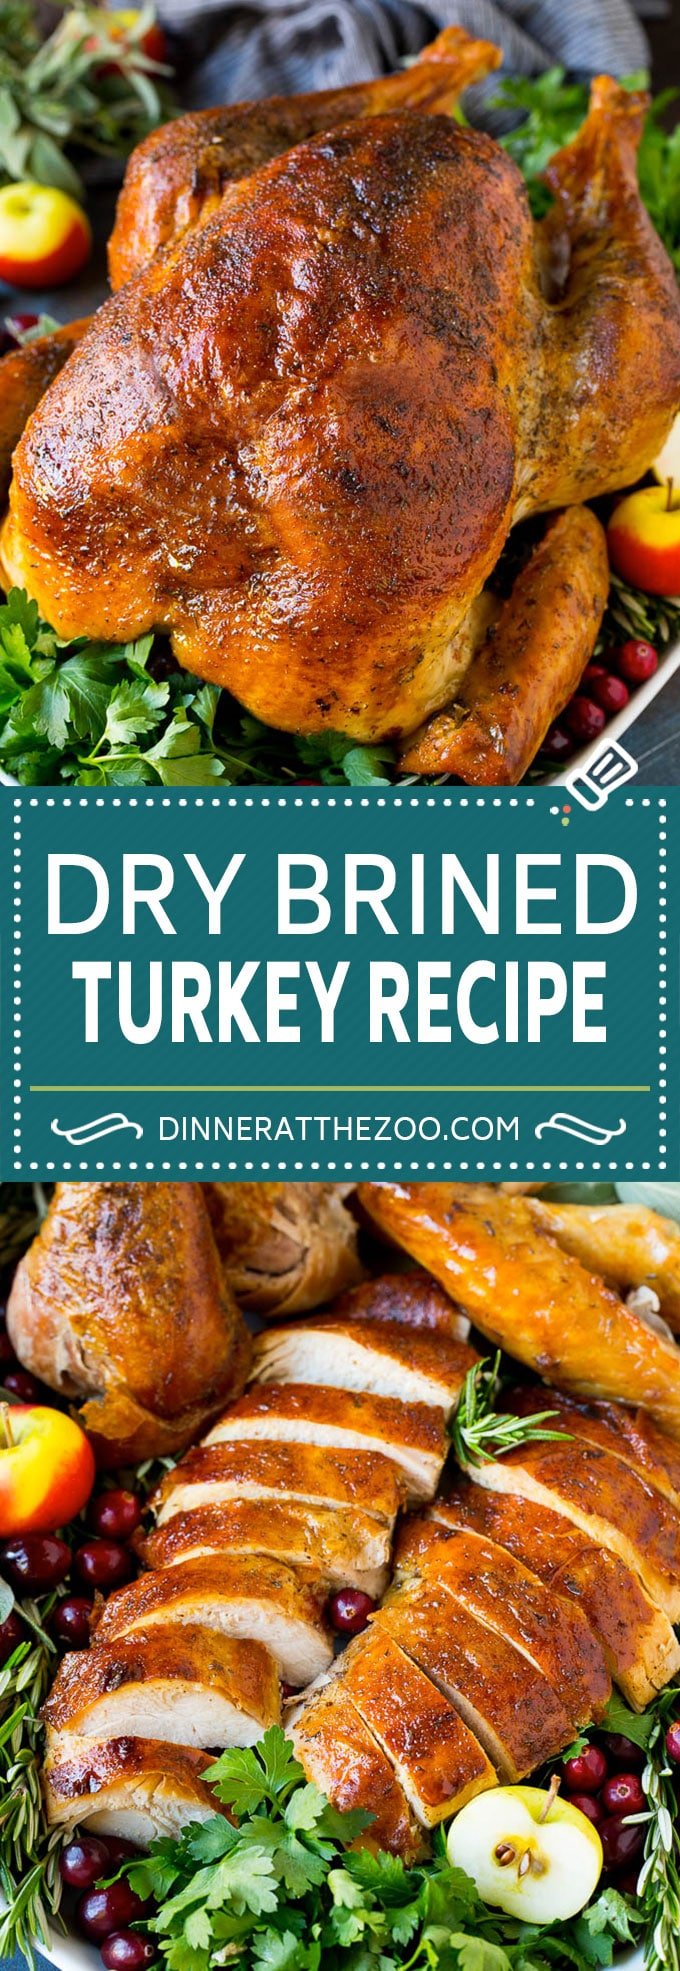 This dry brined turkey is coated in a blend of salt, herbs and spices, then roasted to golden brown perfection.